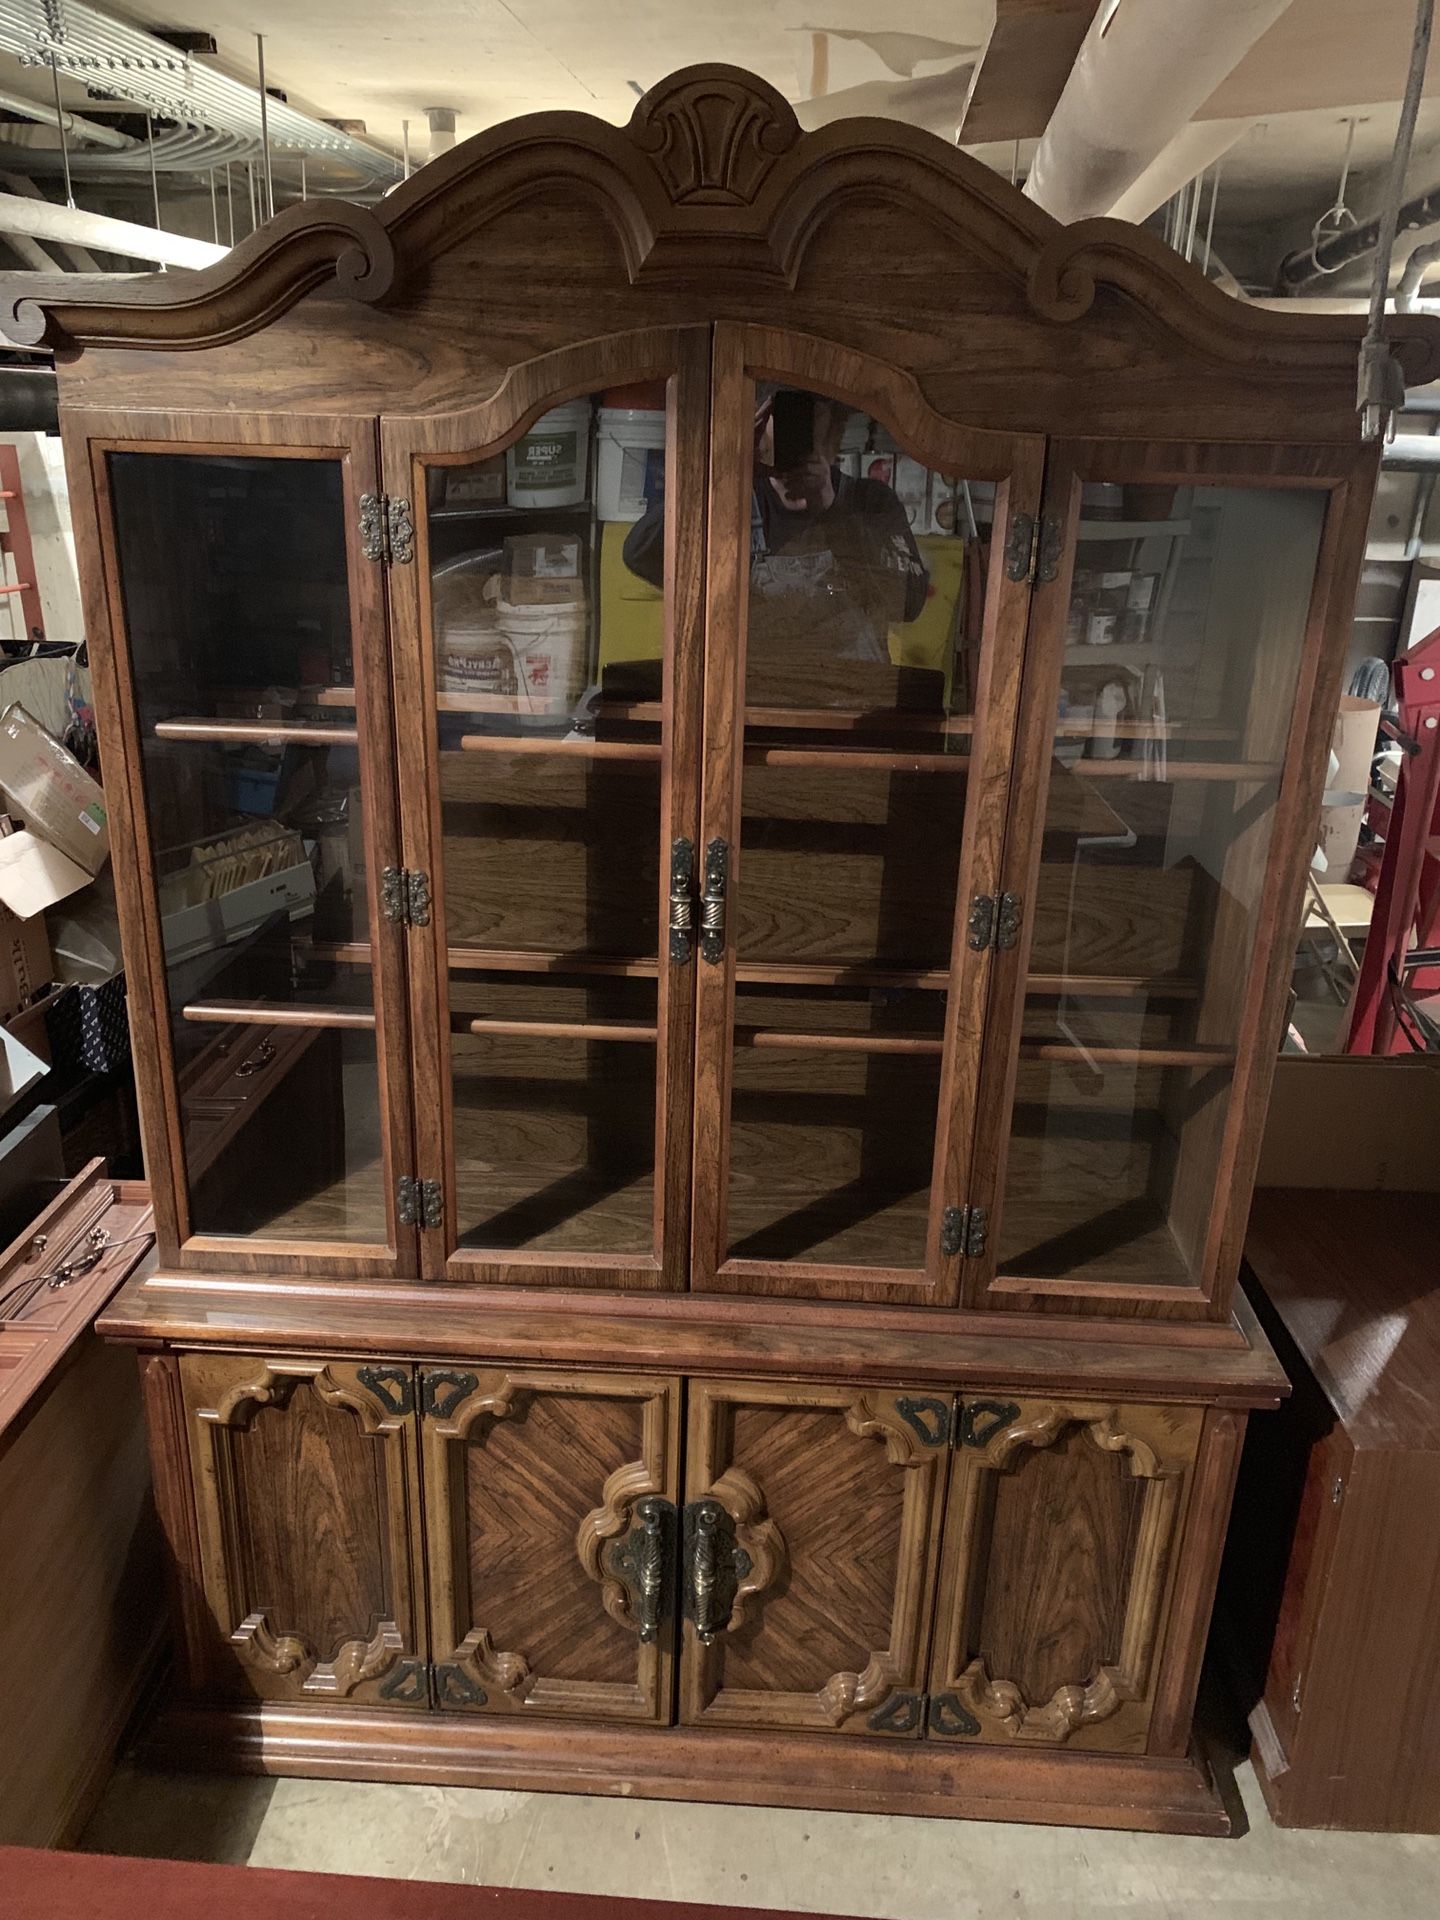 China hutch with glass shelves